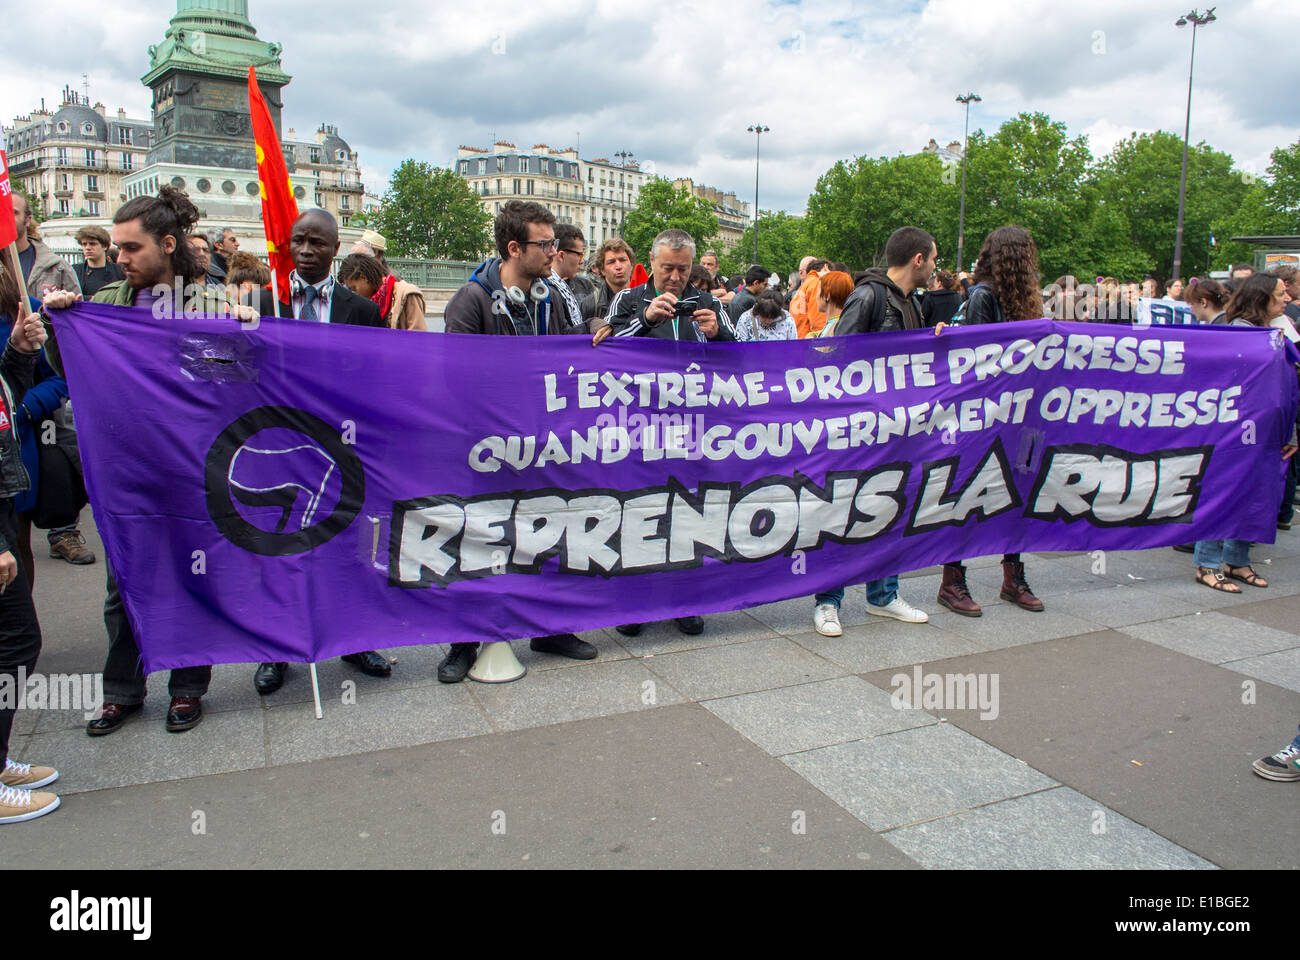 Paris, France, Crowd, Far Left, Anti-Extreme Right Demonstration by French Teens Students, Youth Holding Protest Banner Marching on Street Stock Photo